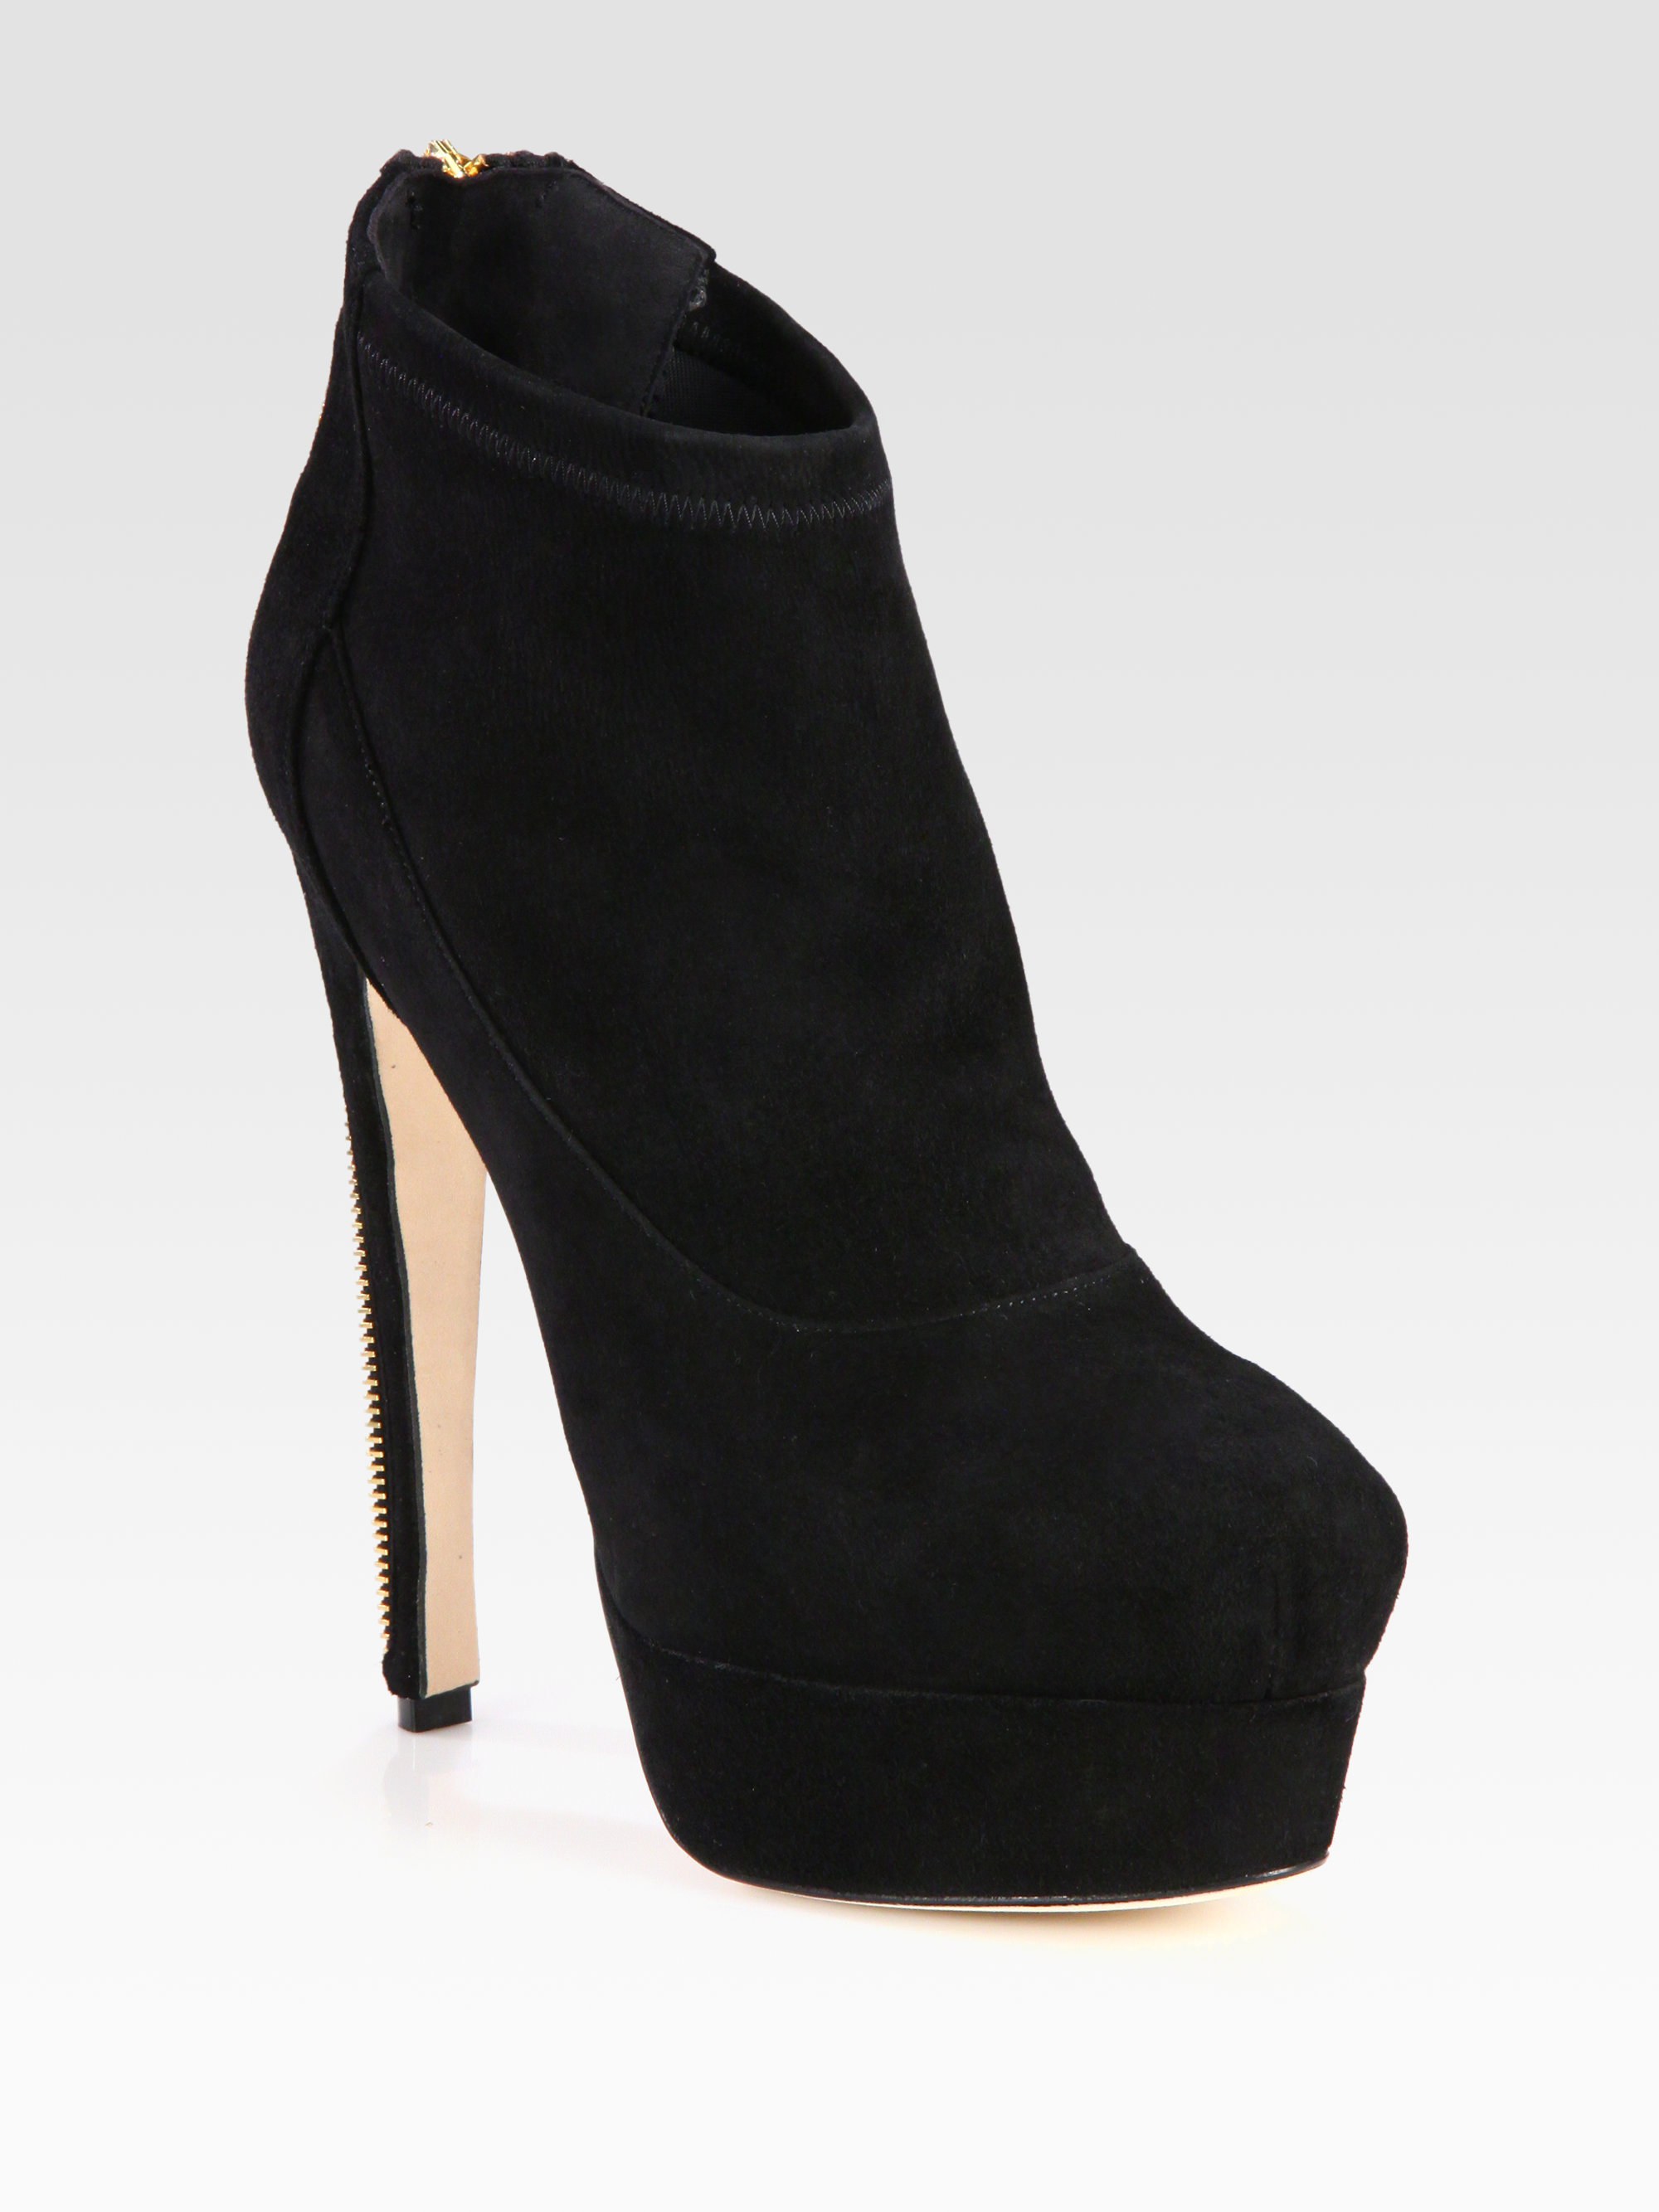 Brian atwood Suede Zip Platform Ankle Boots in Black | Lyst